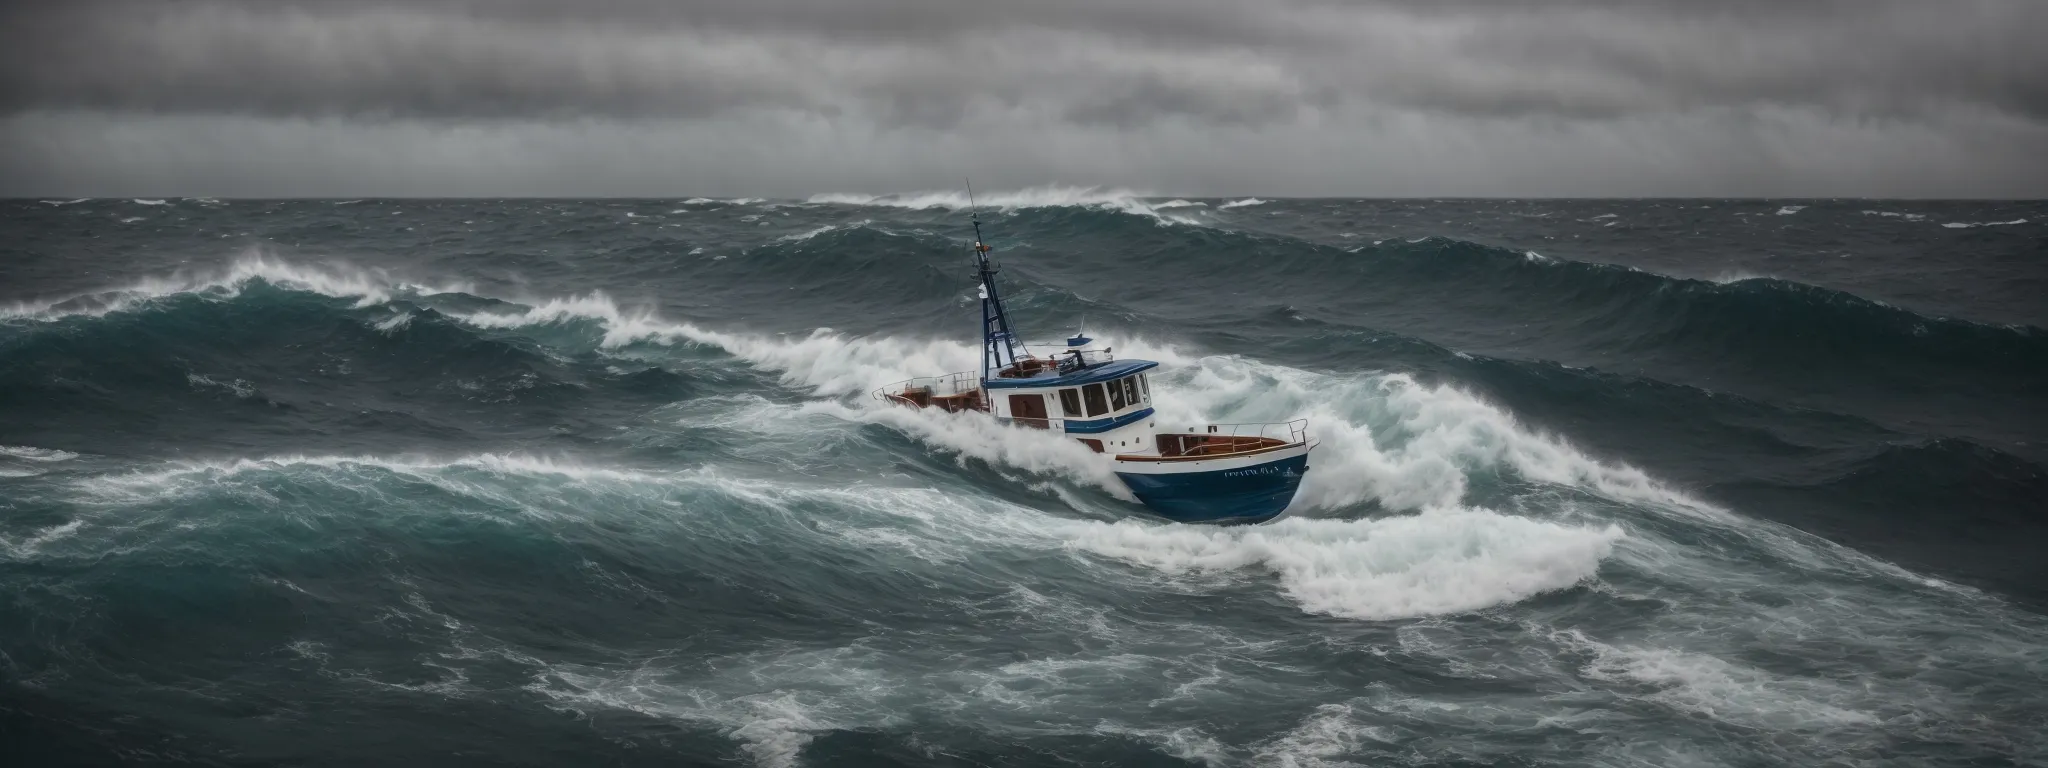 a small boat navigating large, rough ocean waves under stormy skies.